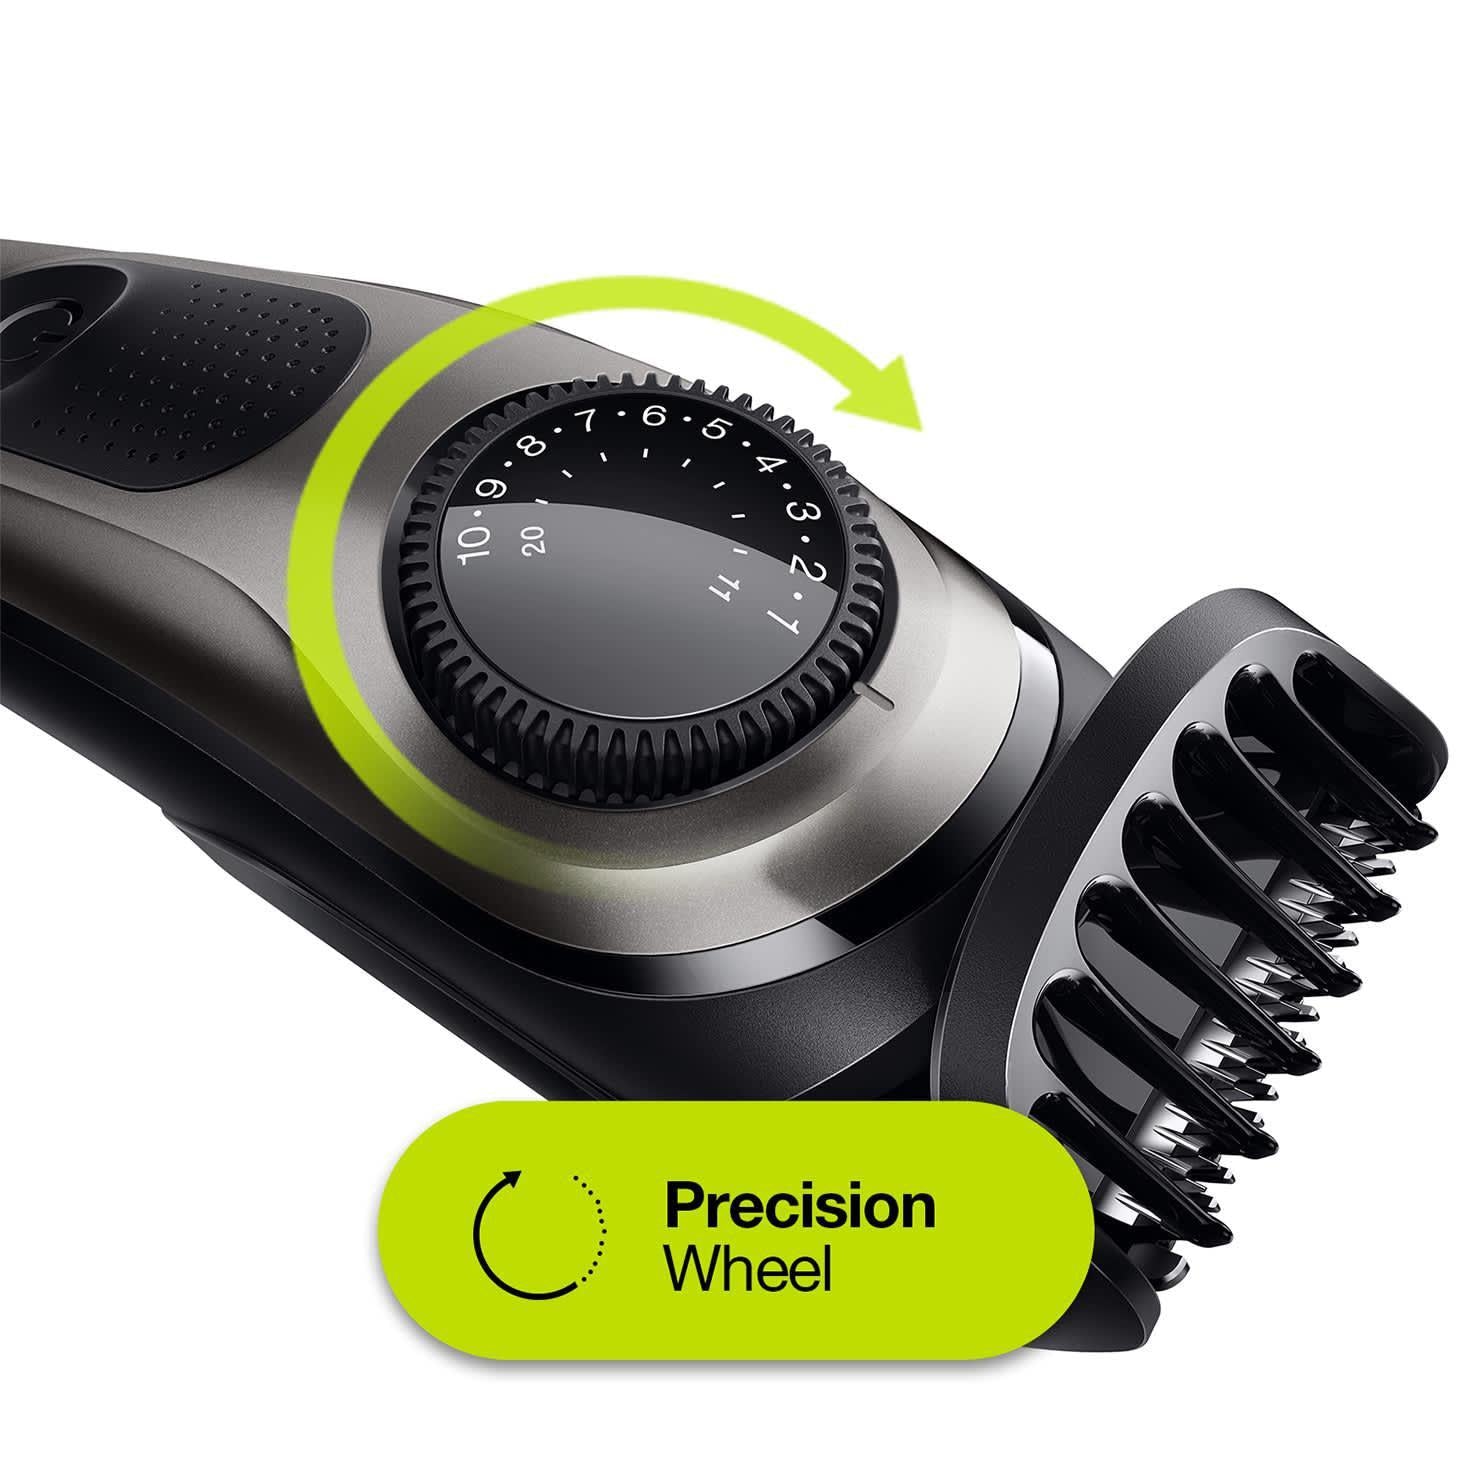 Braun Beard Trimmer BT7240 with Precision Dial - 4 Attachments, Gillette Razor - Healthxpress.ie